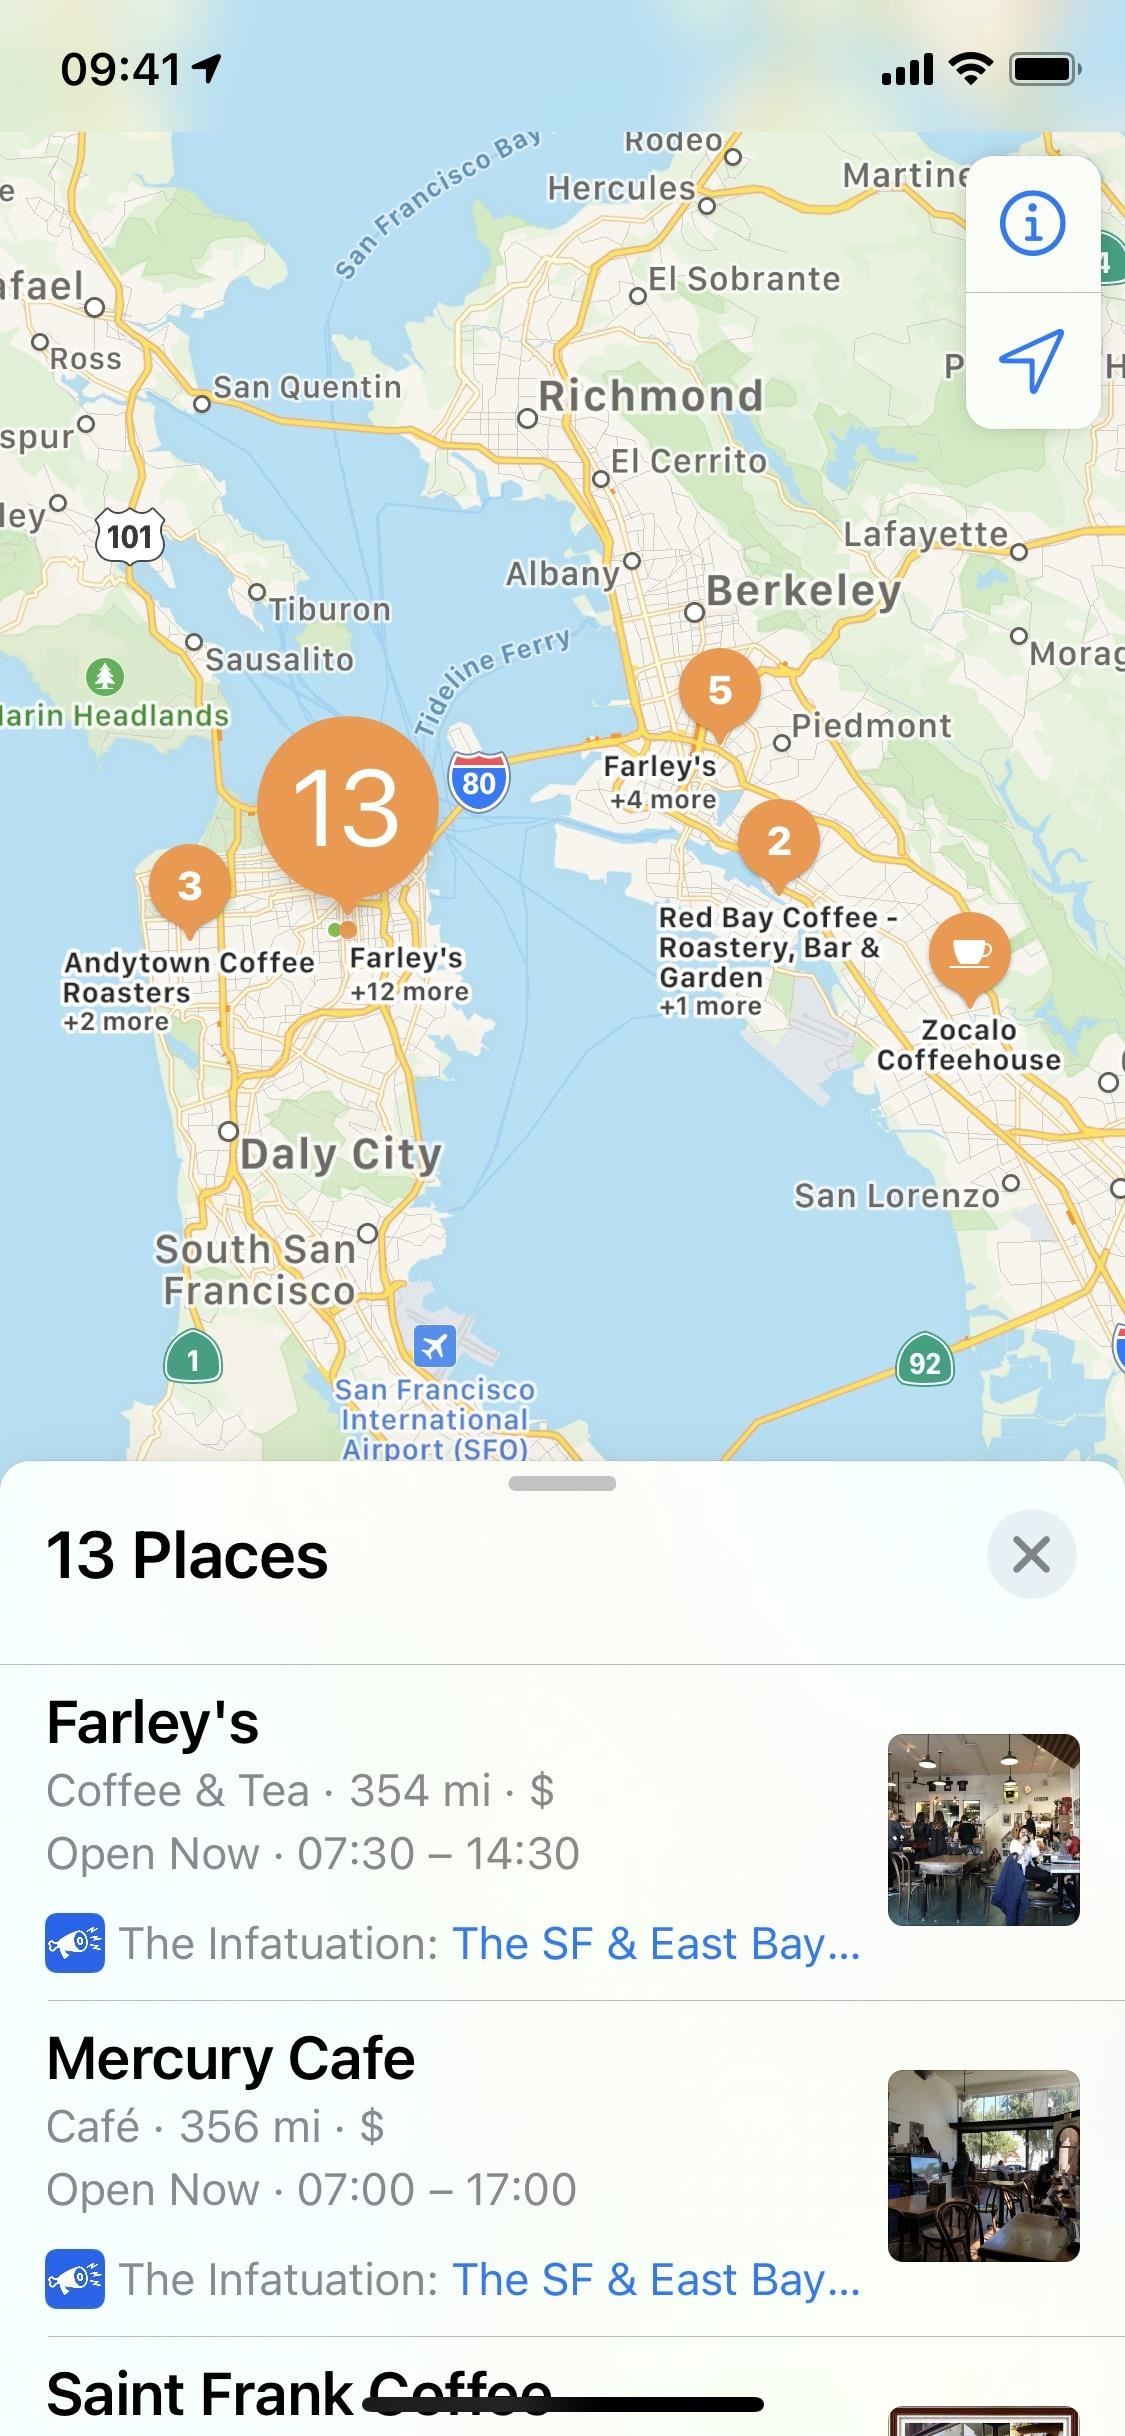 See Nearby Recommendations from Brands via Curated City Guides in iOS 14's Apple Maps